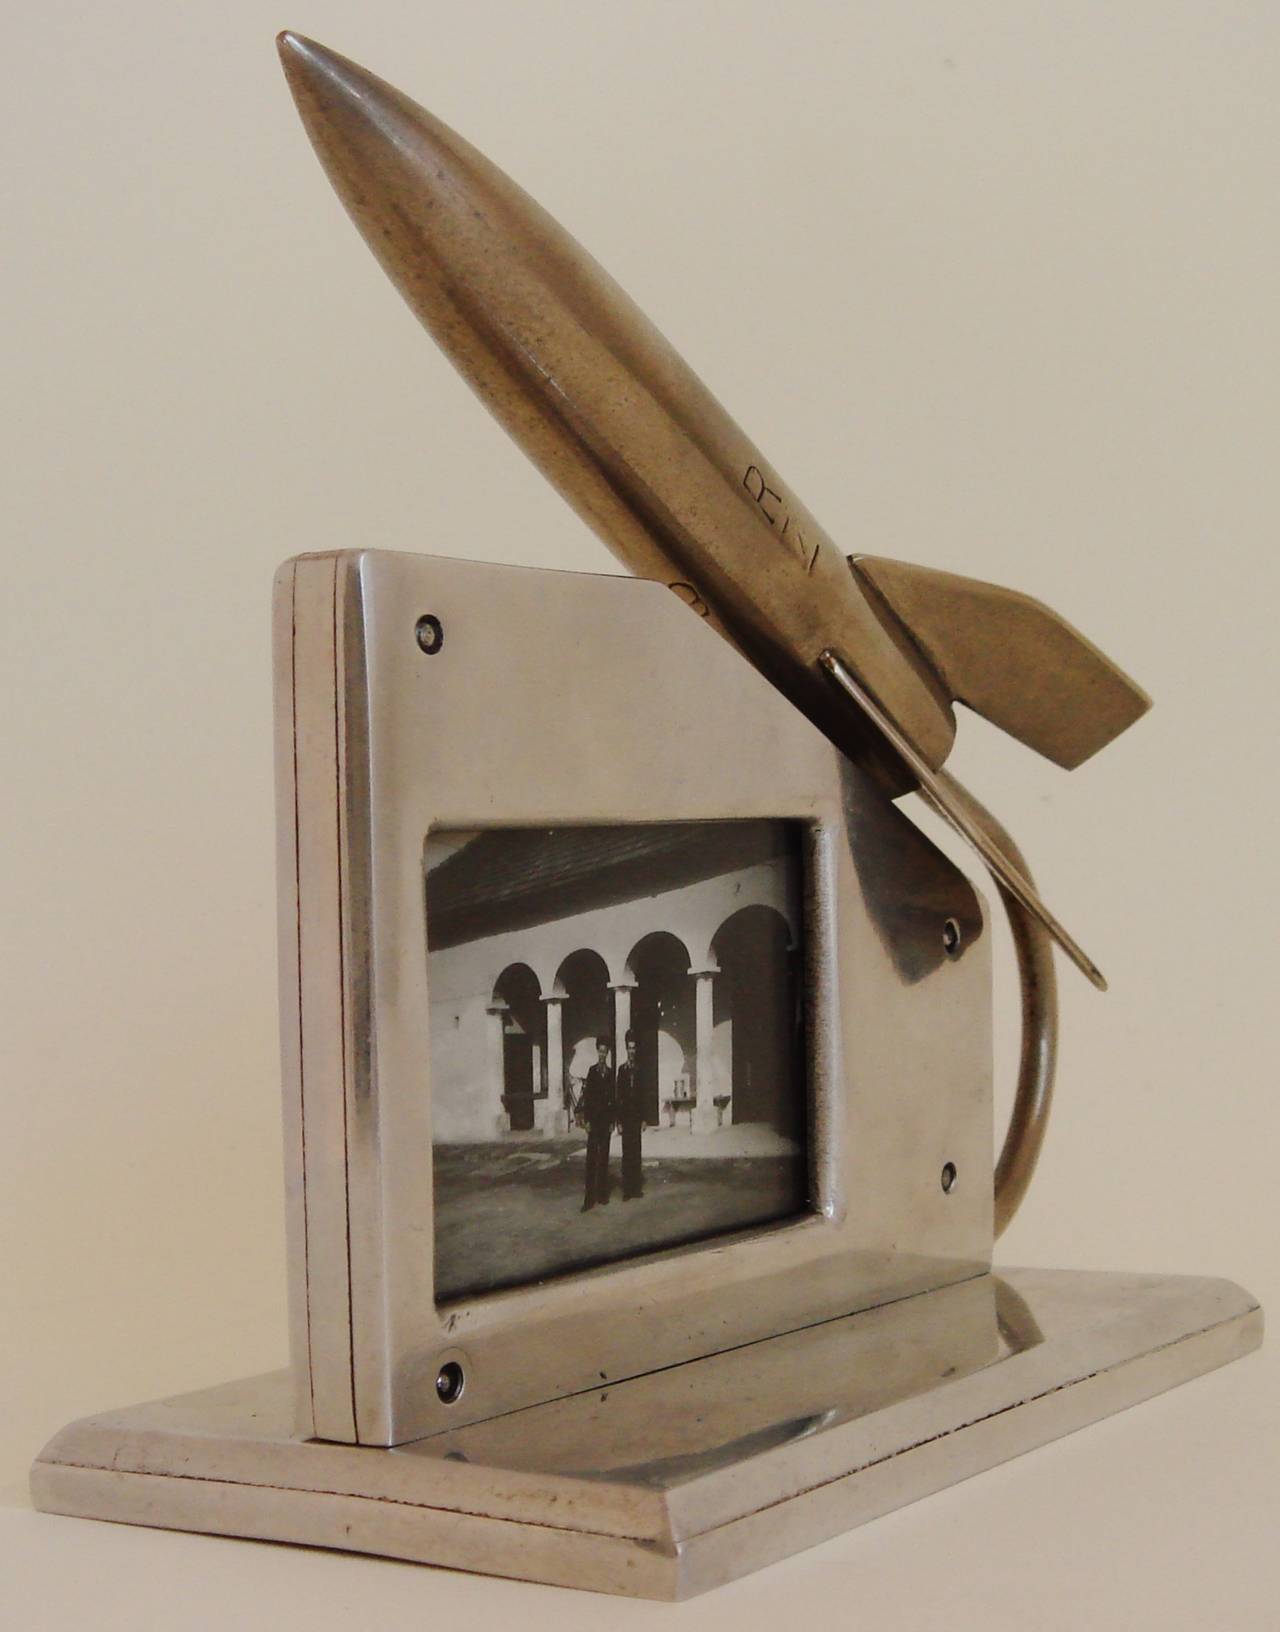 This fabulous American, Jet-Age, Trench or Outsider Art polished aluminium and steel frame features an asymmetrical design with a polished steel rocket swooping up over it. The frame is double-sided and can be opened up to change the photographs by